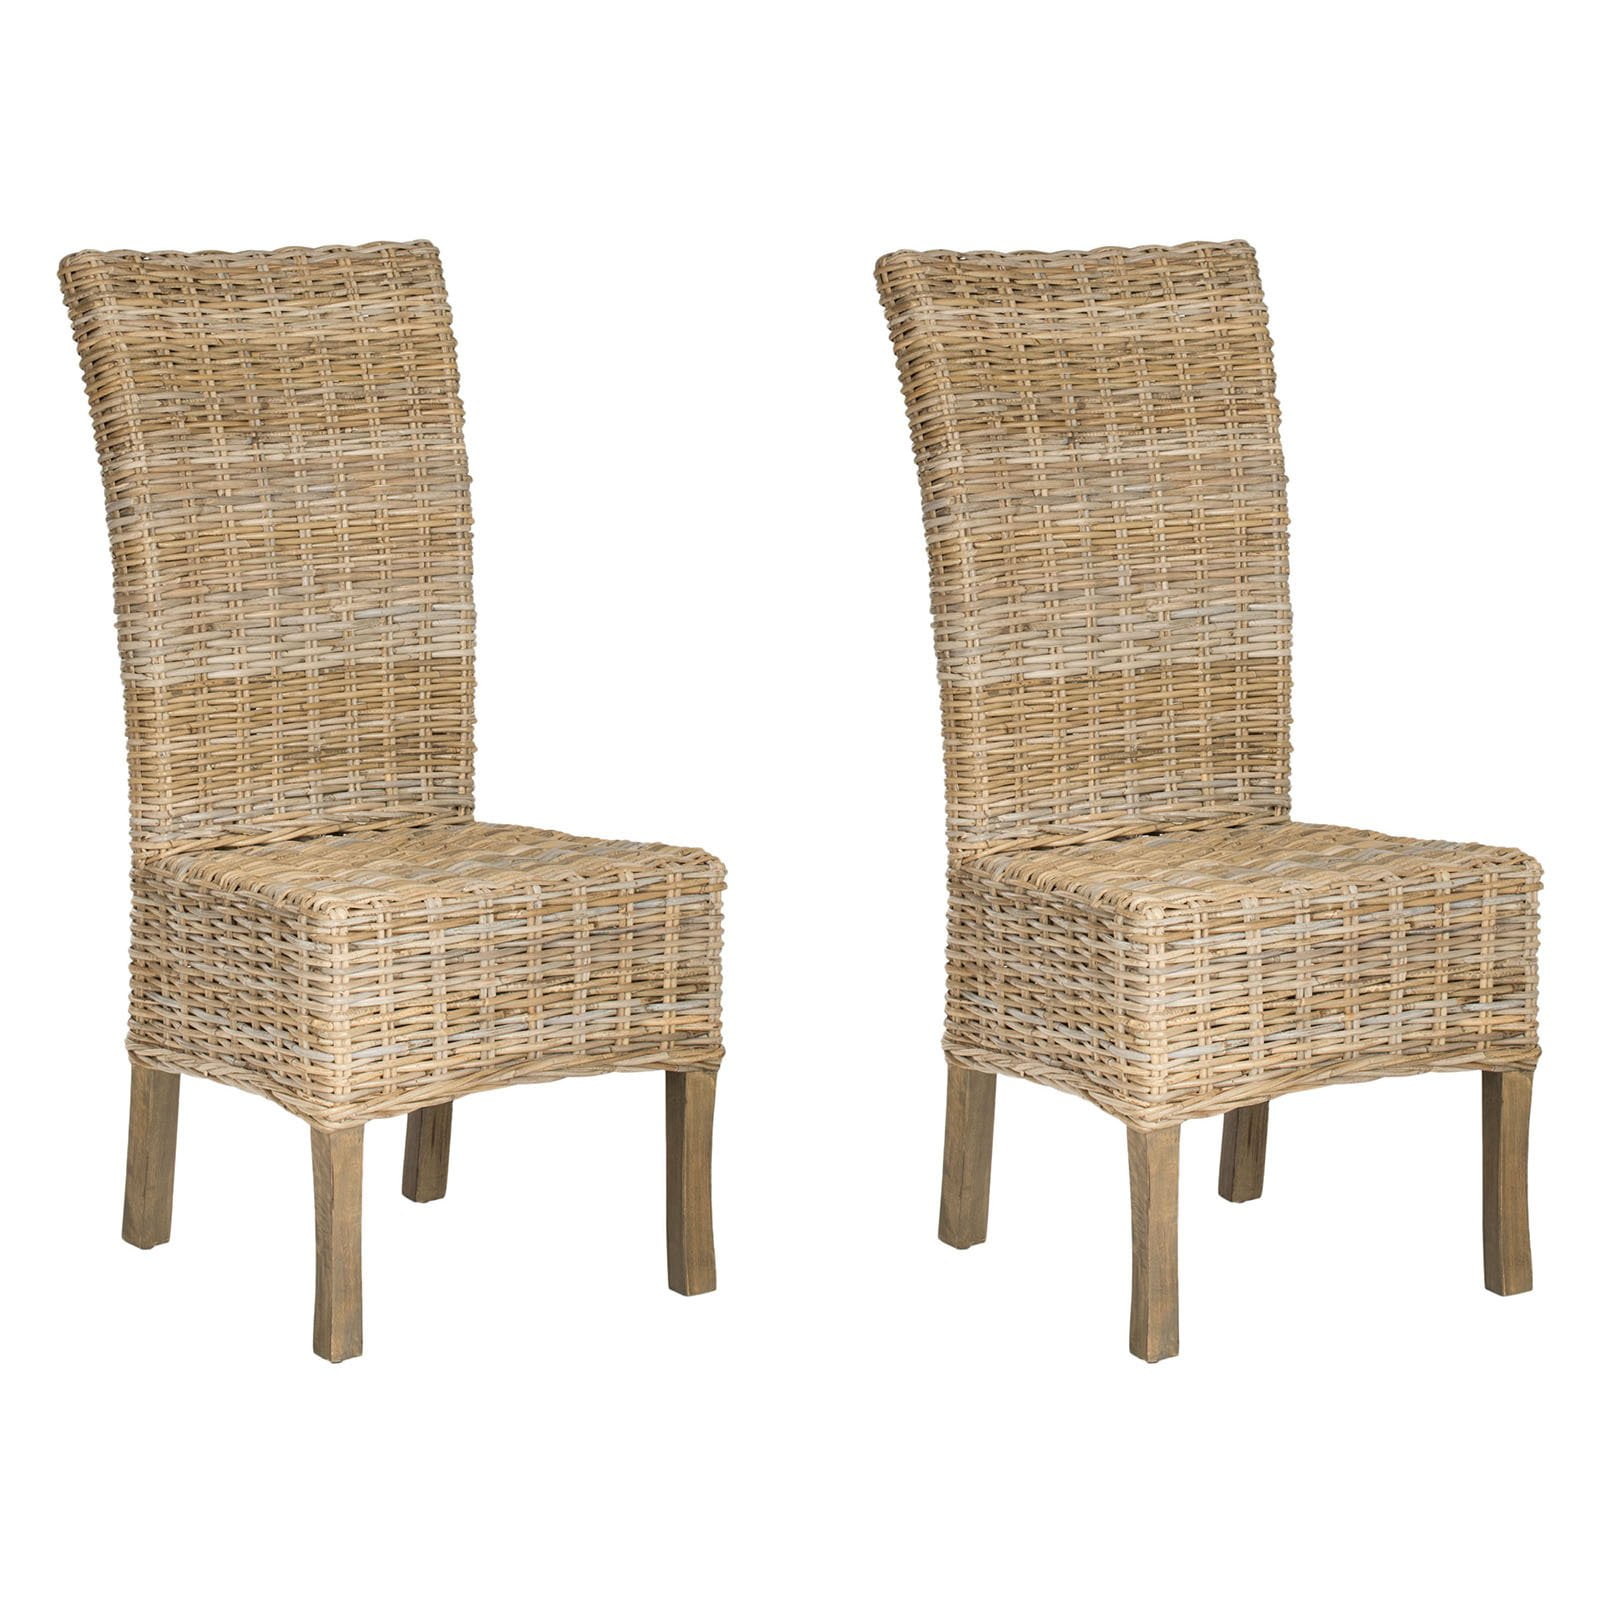 Safavieh Quaker Wicker Dining Side Chairs Set of 2